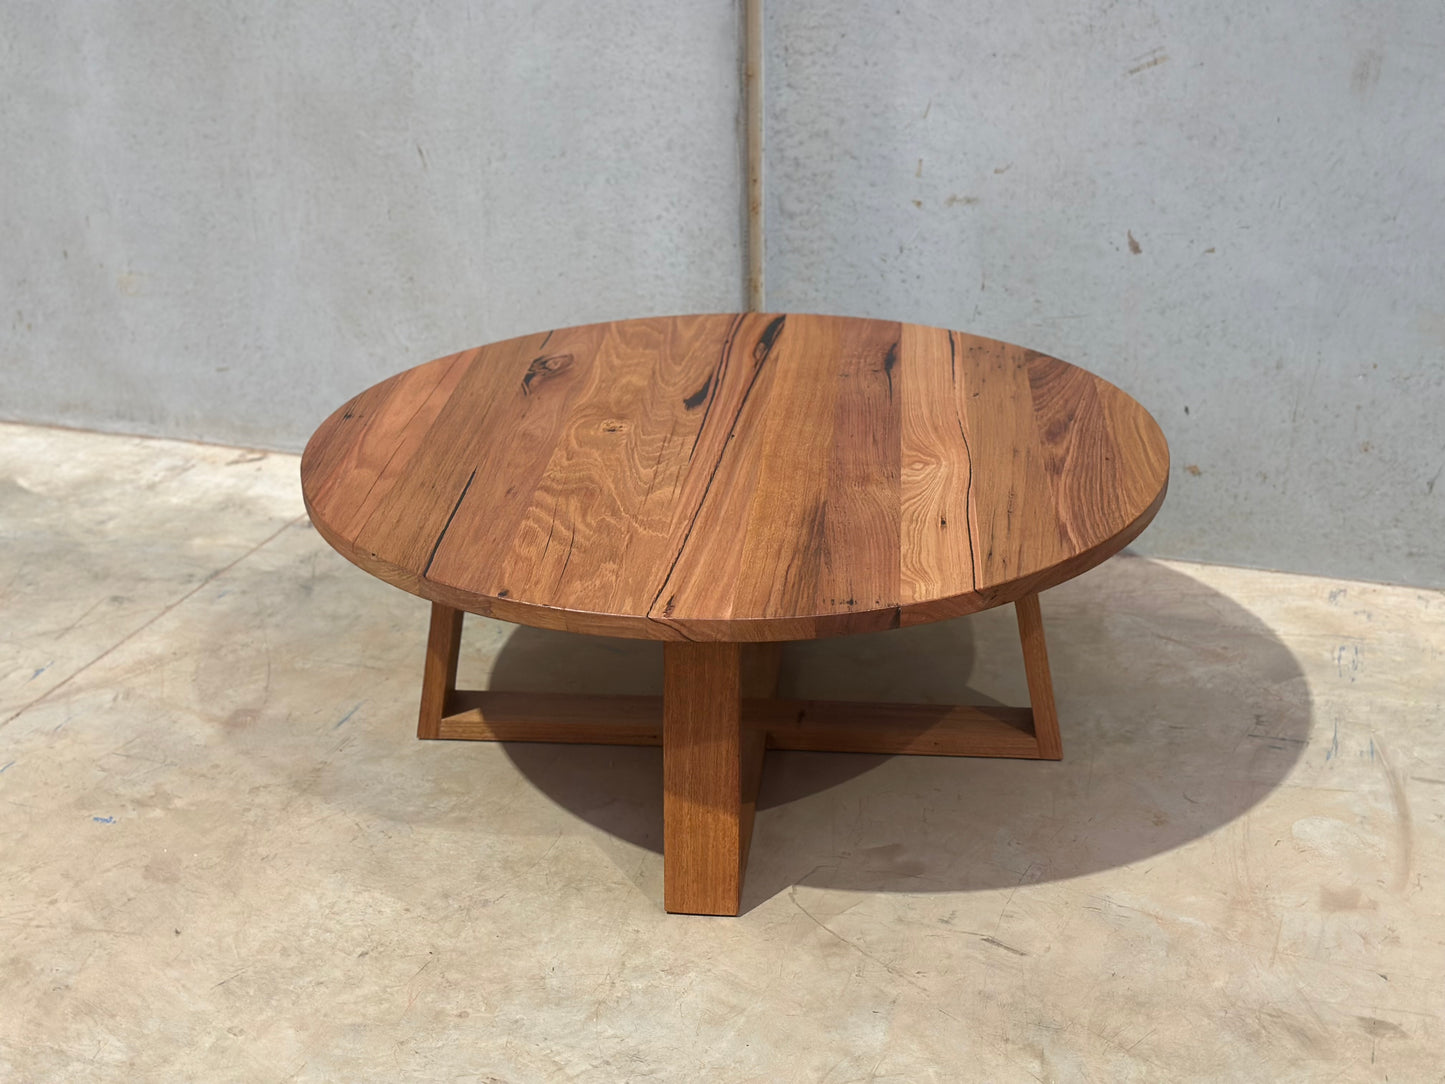 Available Now - Nordic Coffee Table Messmate 995mm round